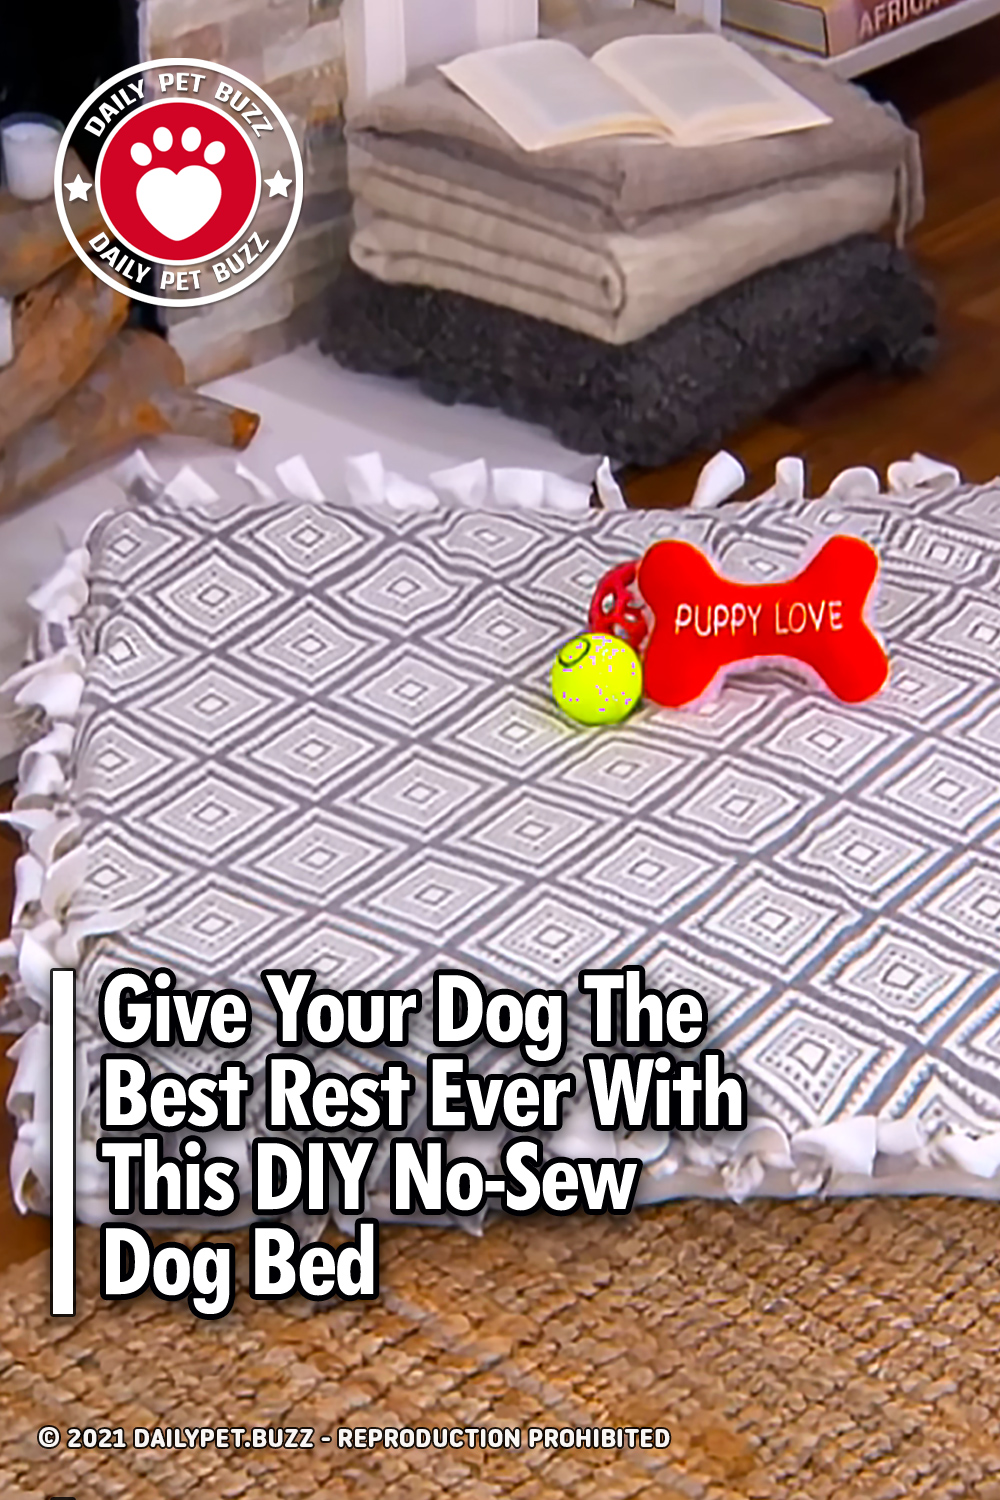 Give Your Dog The Best Rest Ever With This DIY No-Sew Dog Bed